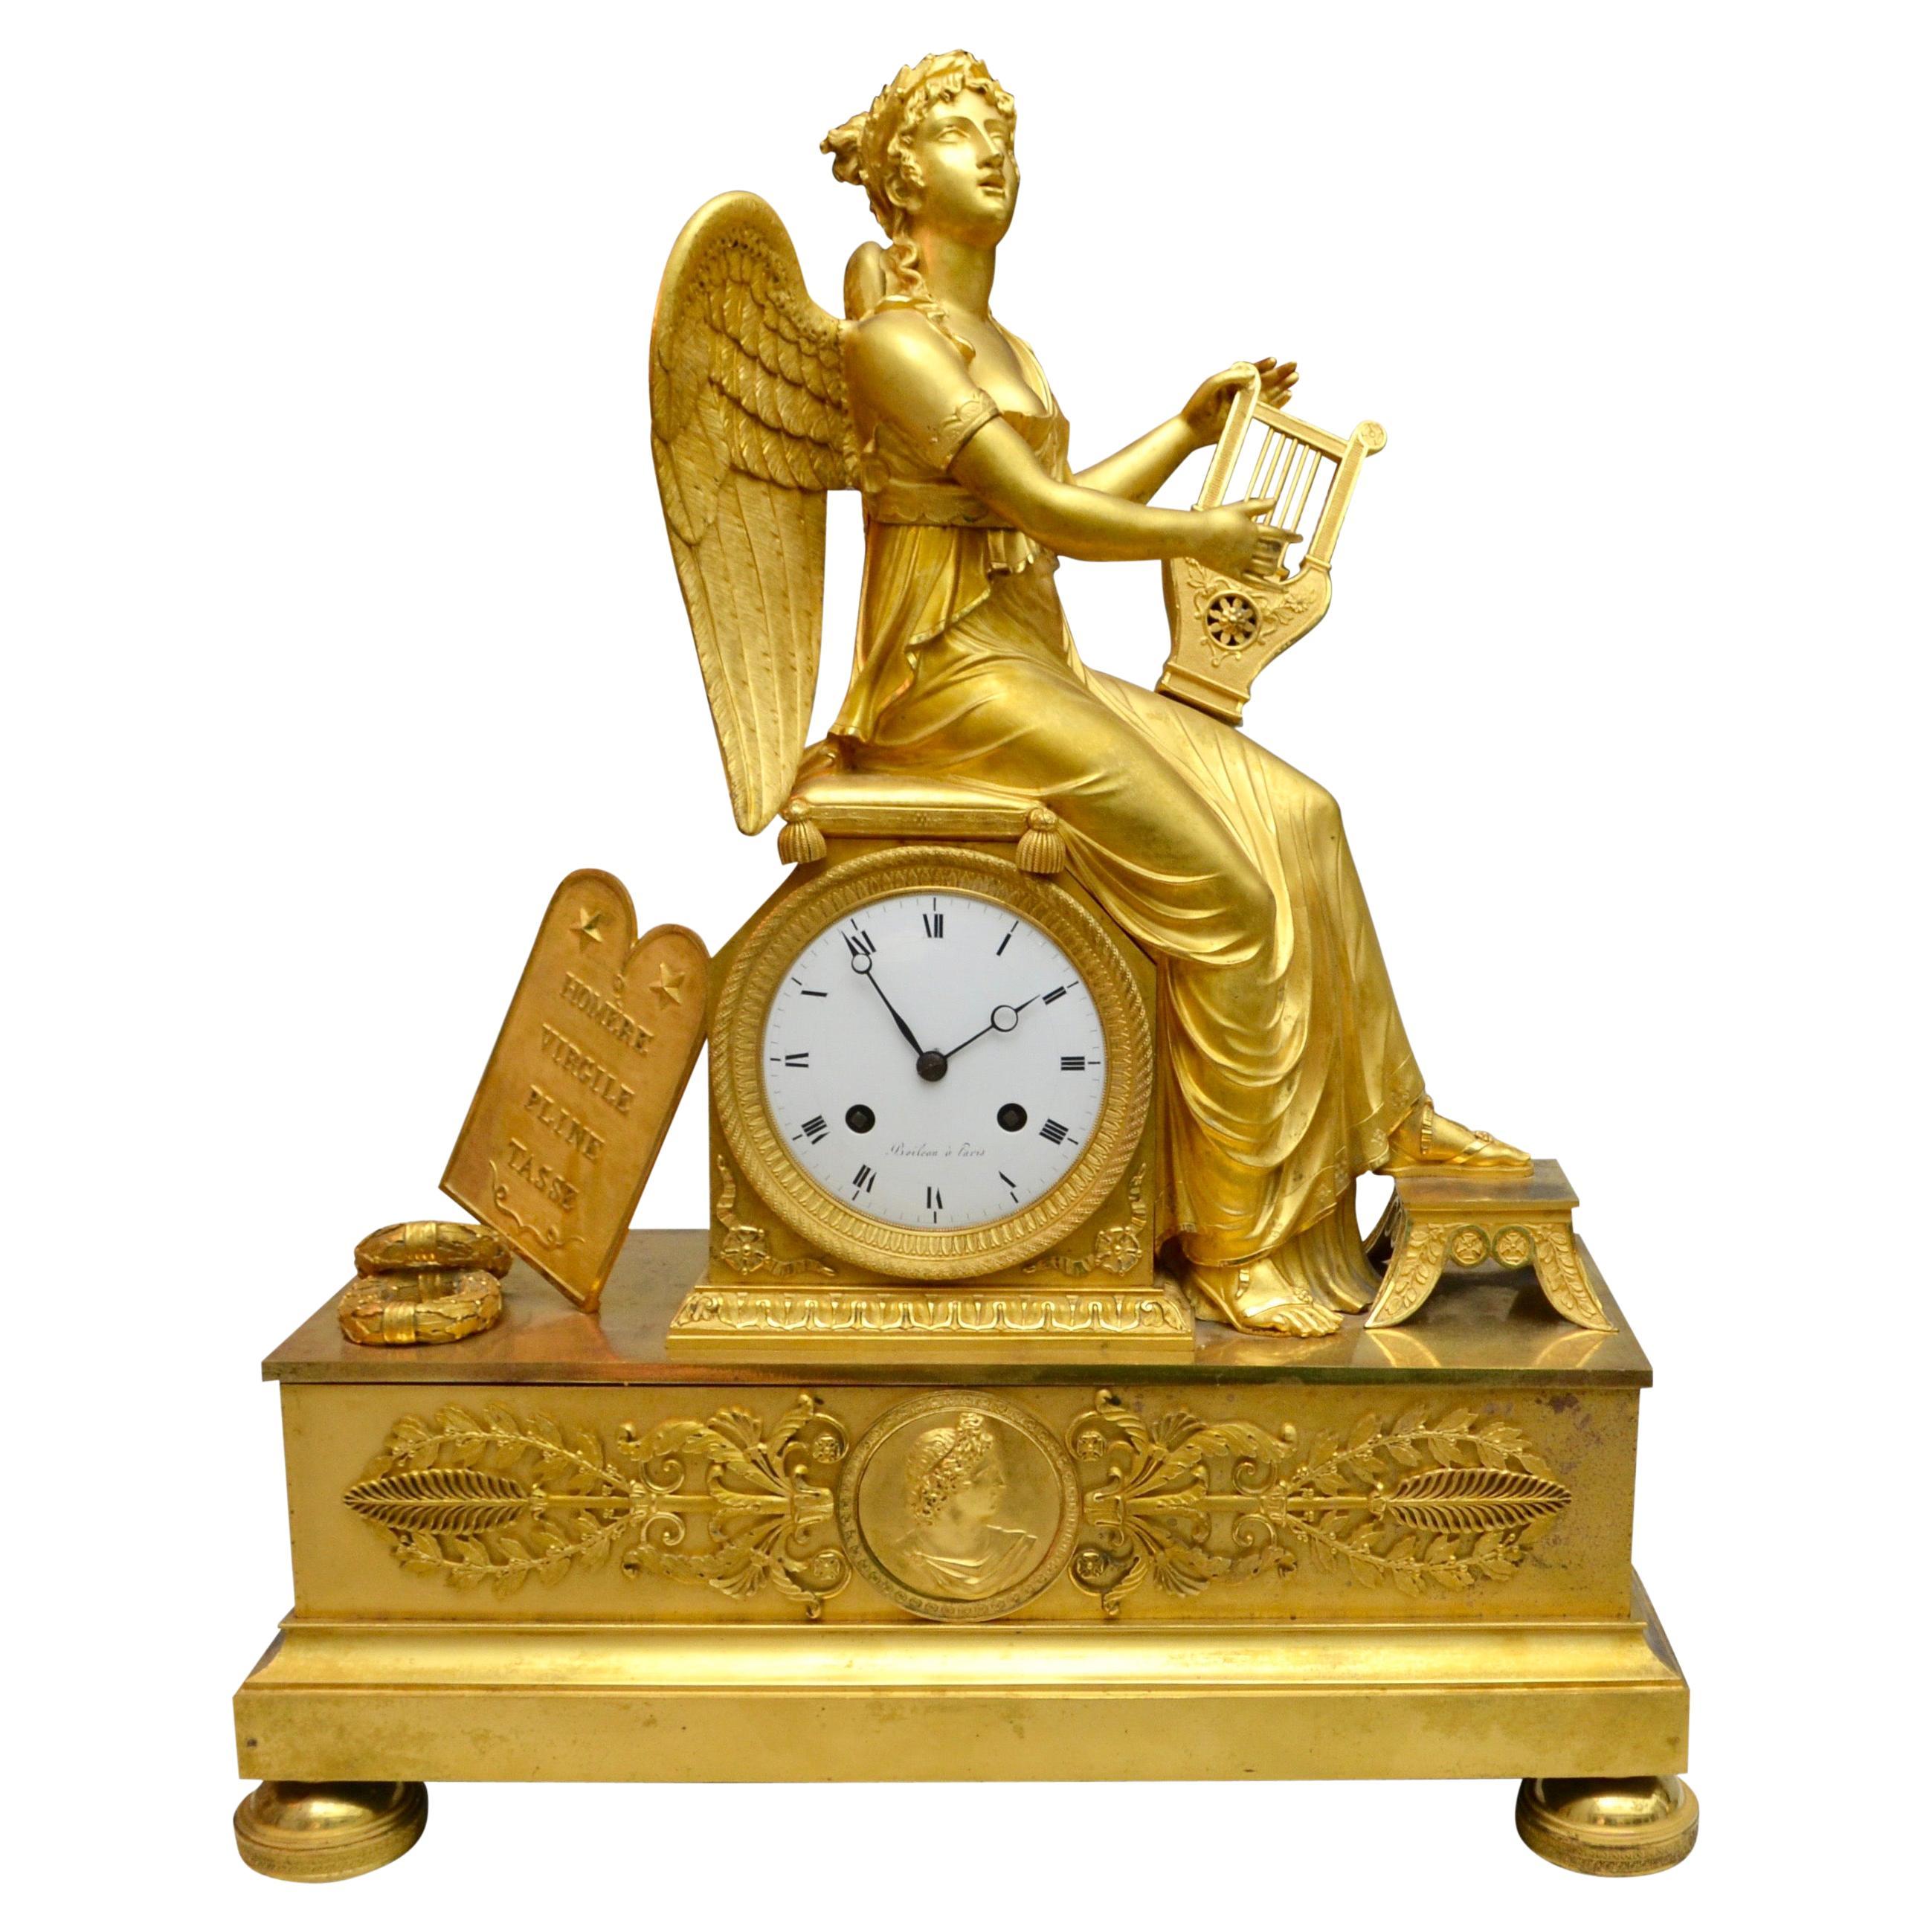 Allegorical Gilt Bronze Clock Depiction Clio, the Muse of History and Music